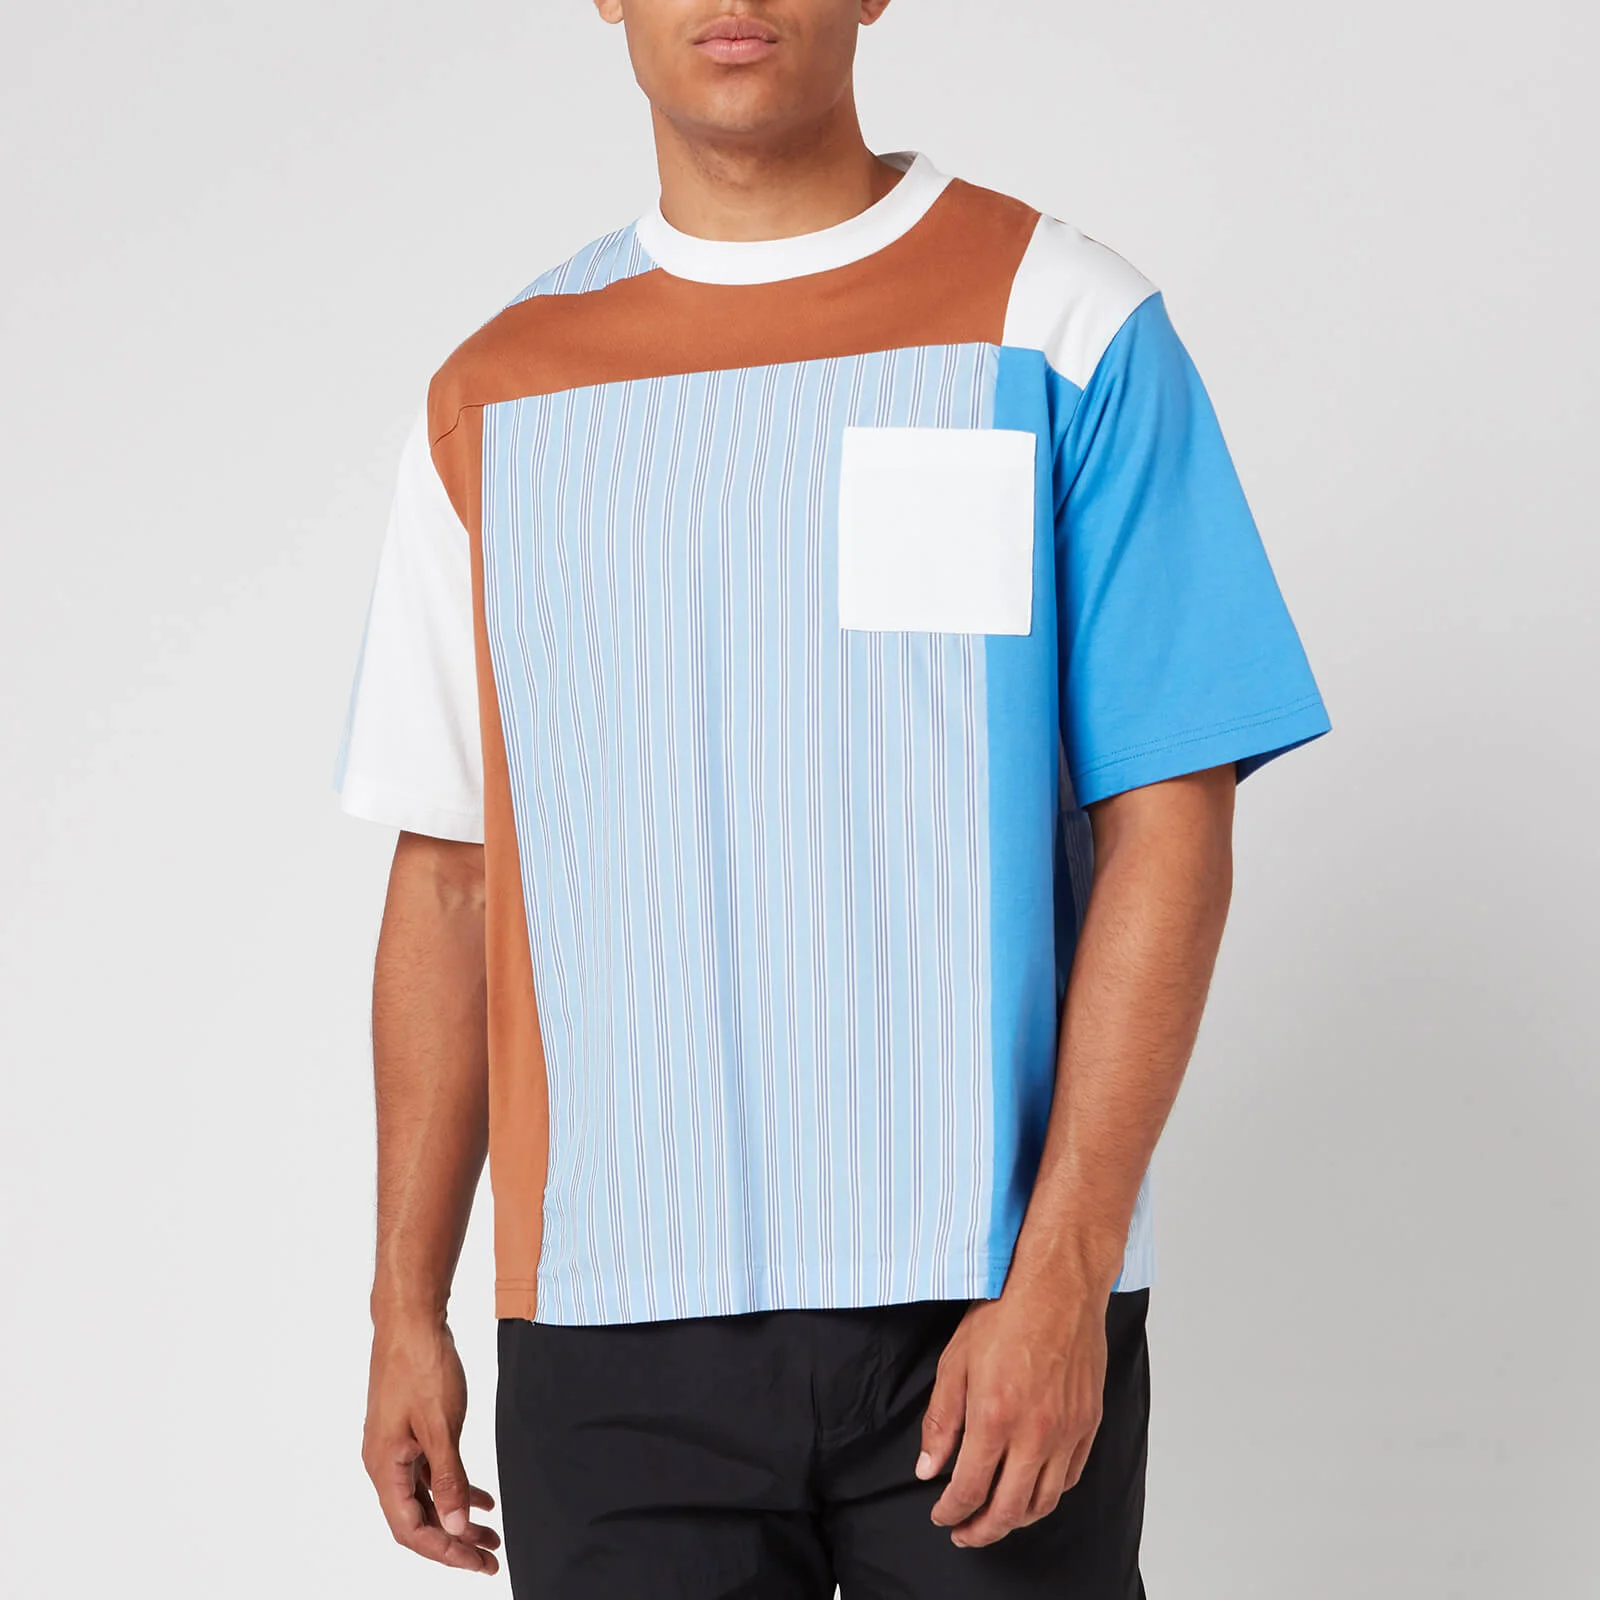 White Mountaineering Men's Stripe Contrasted T Shirt - Blue Image 1